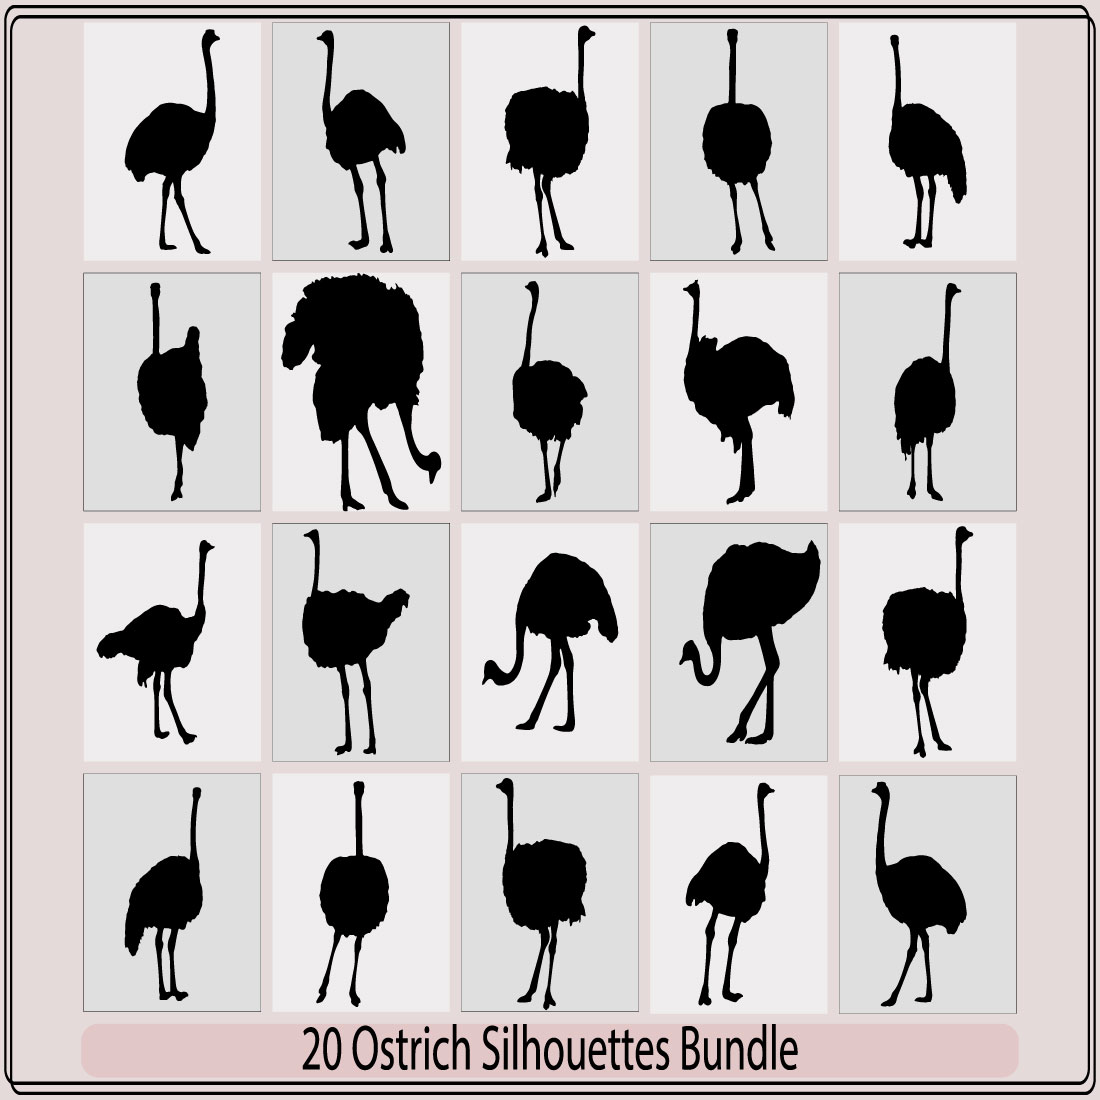 ostrich silhouette collection,silhouette of ostrich,Set of ostrich silhouettes,set of ostrich logo,Vector illustration of a black silhouette ostrich cover image.